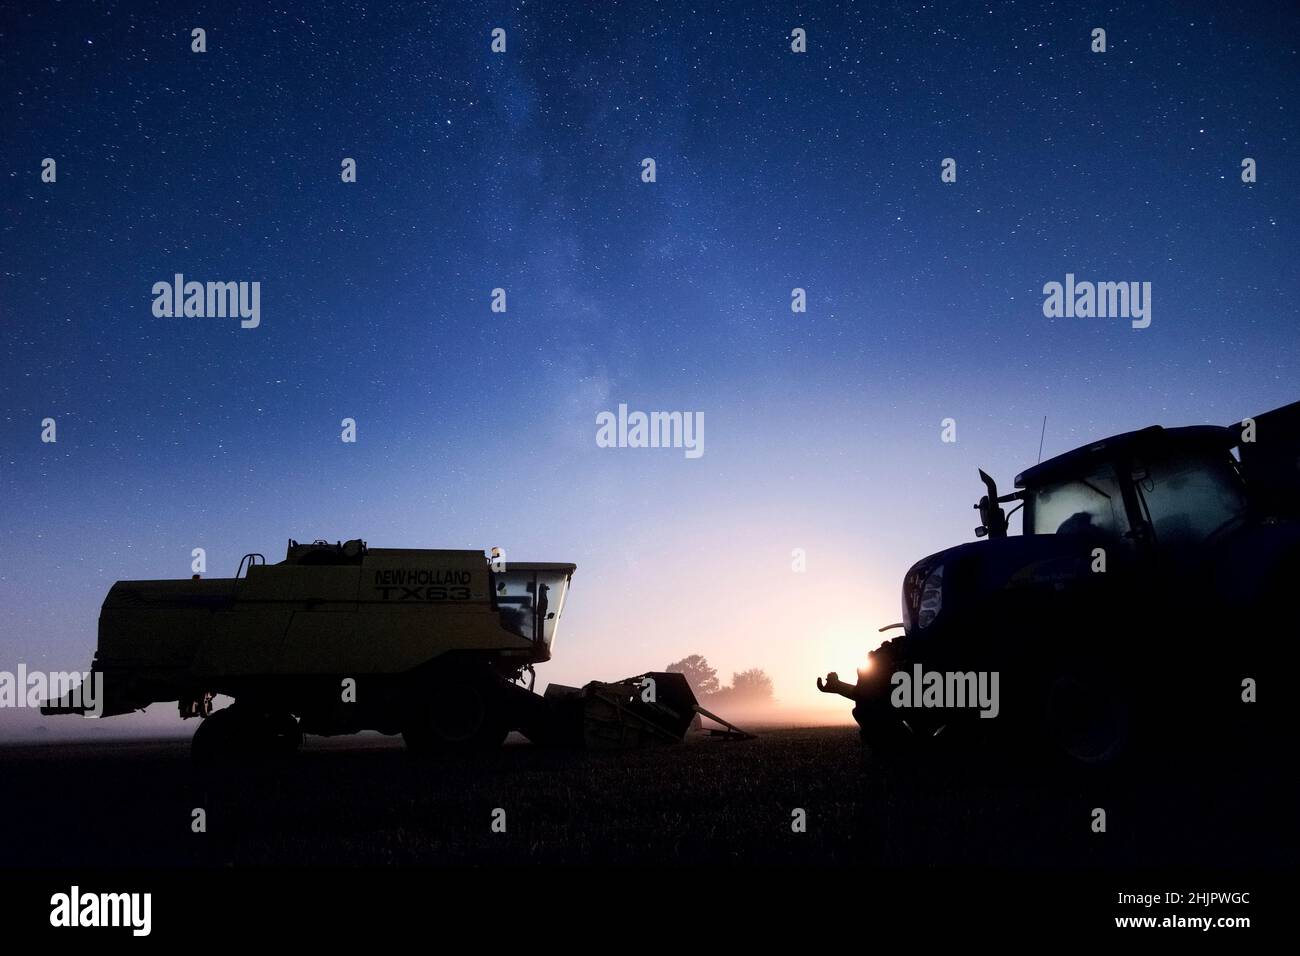 Combine harvester and tractor at night with starry sky and setting moon  Norfolk UK Stock Photo